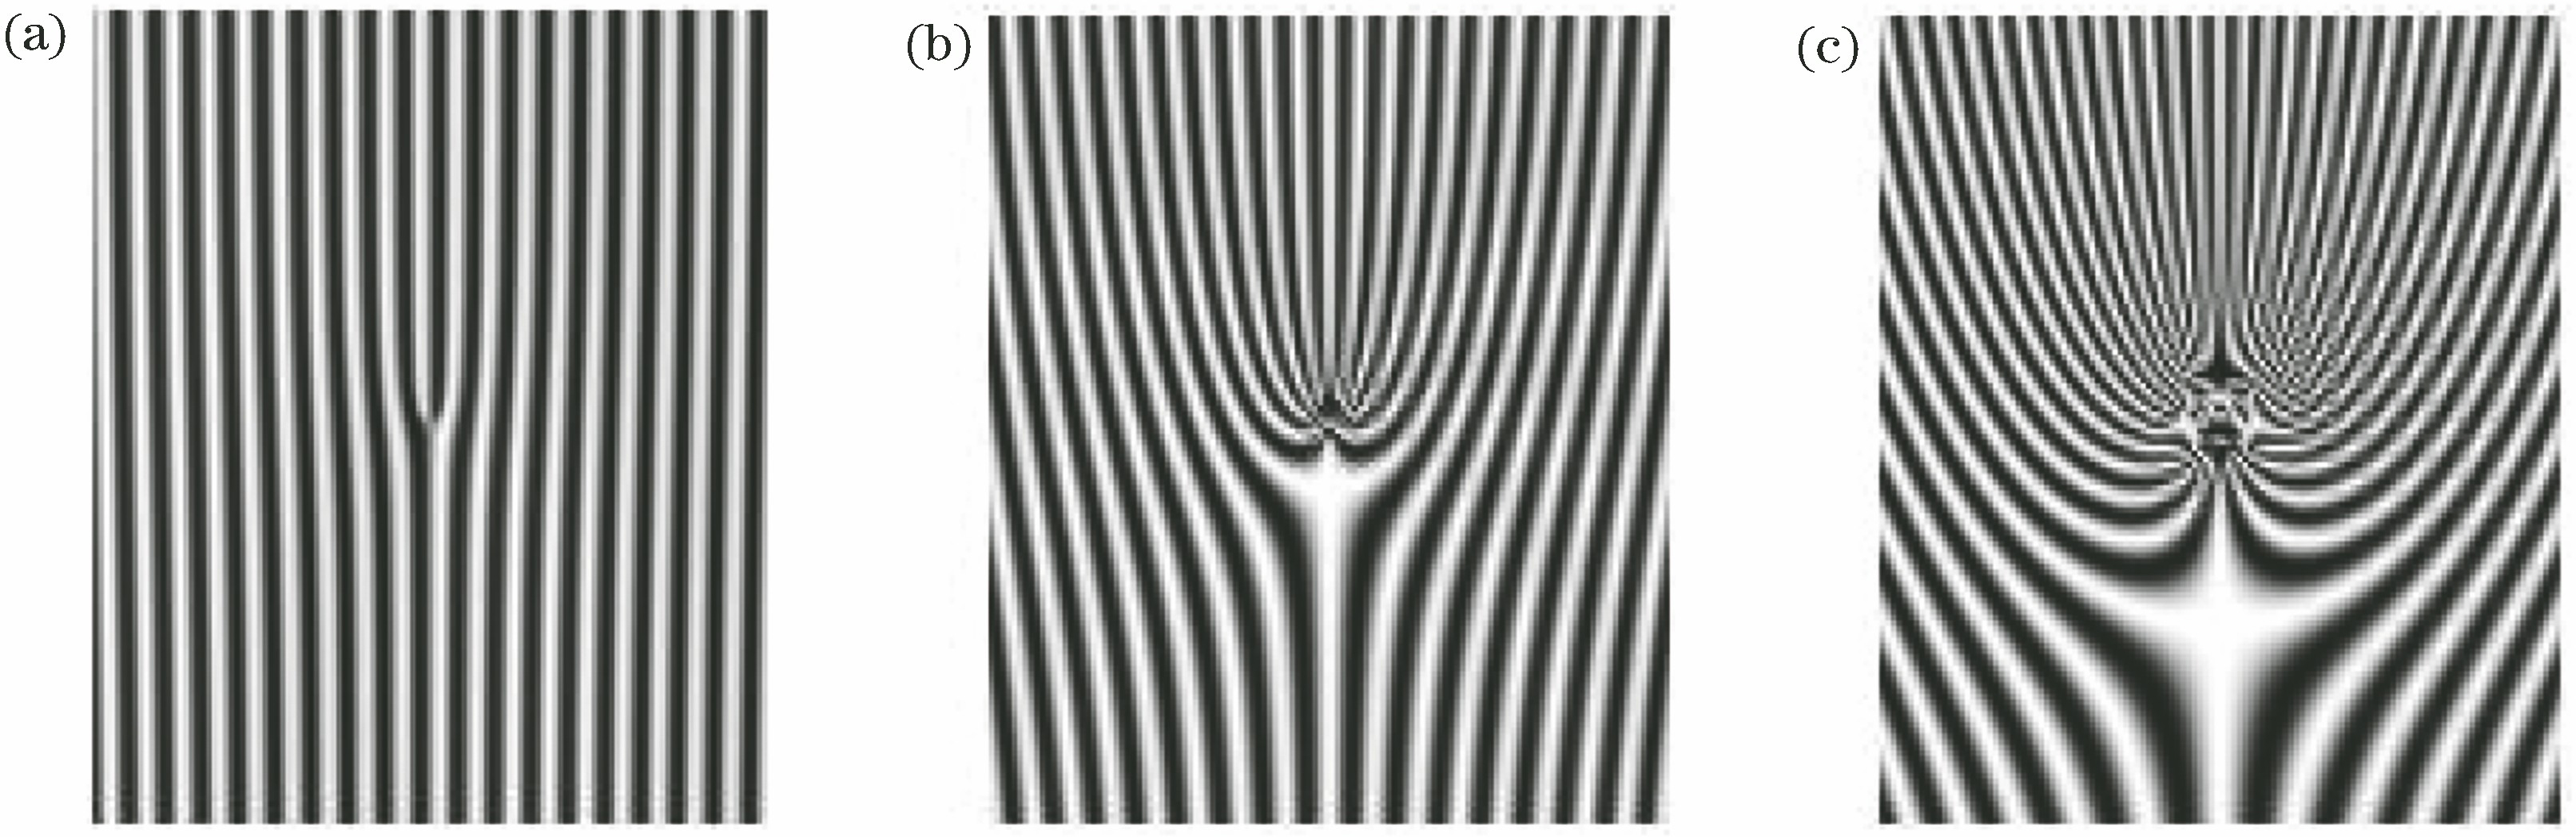 Interference patterns of vortex beams with different topological charges. (a) l=1; (b) l=10; (c) l=30